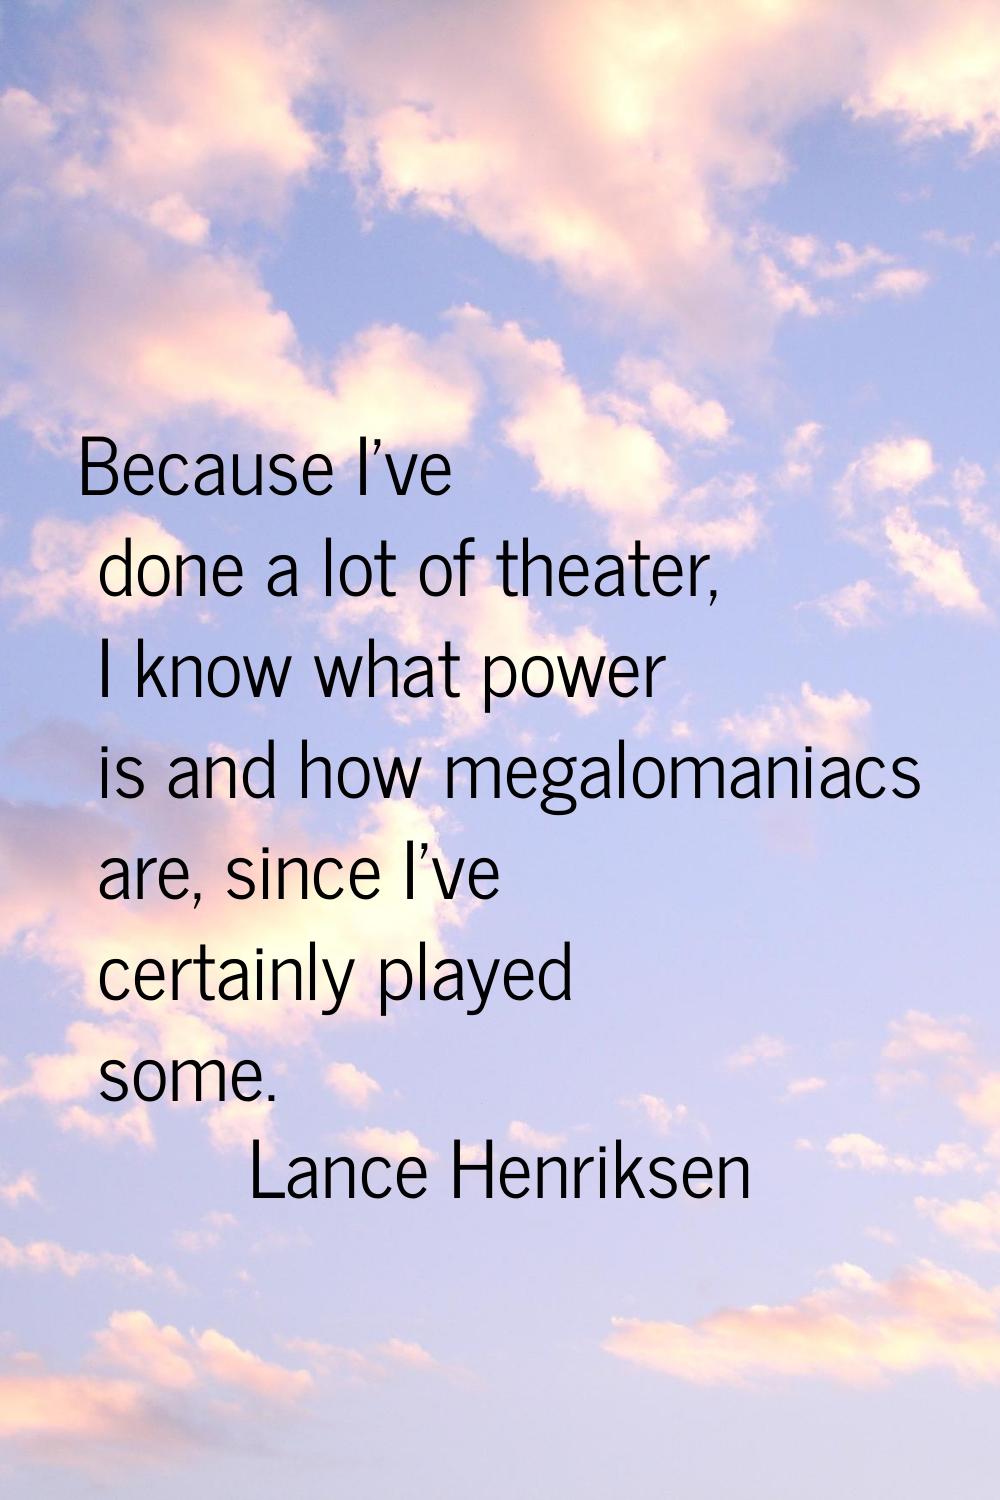 Because I've done a lot of theater, I know what power is and how megalomaniacs are, since I've cert